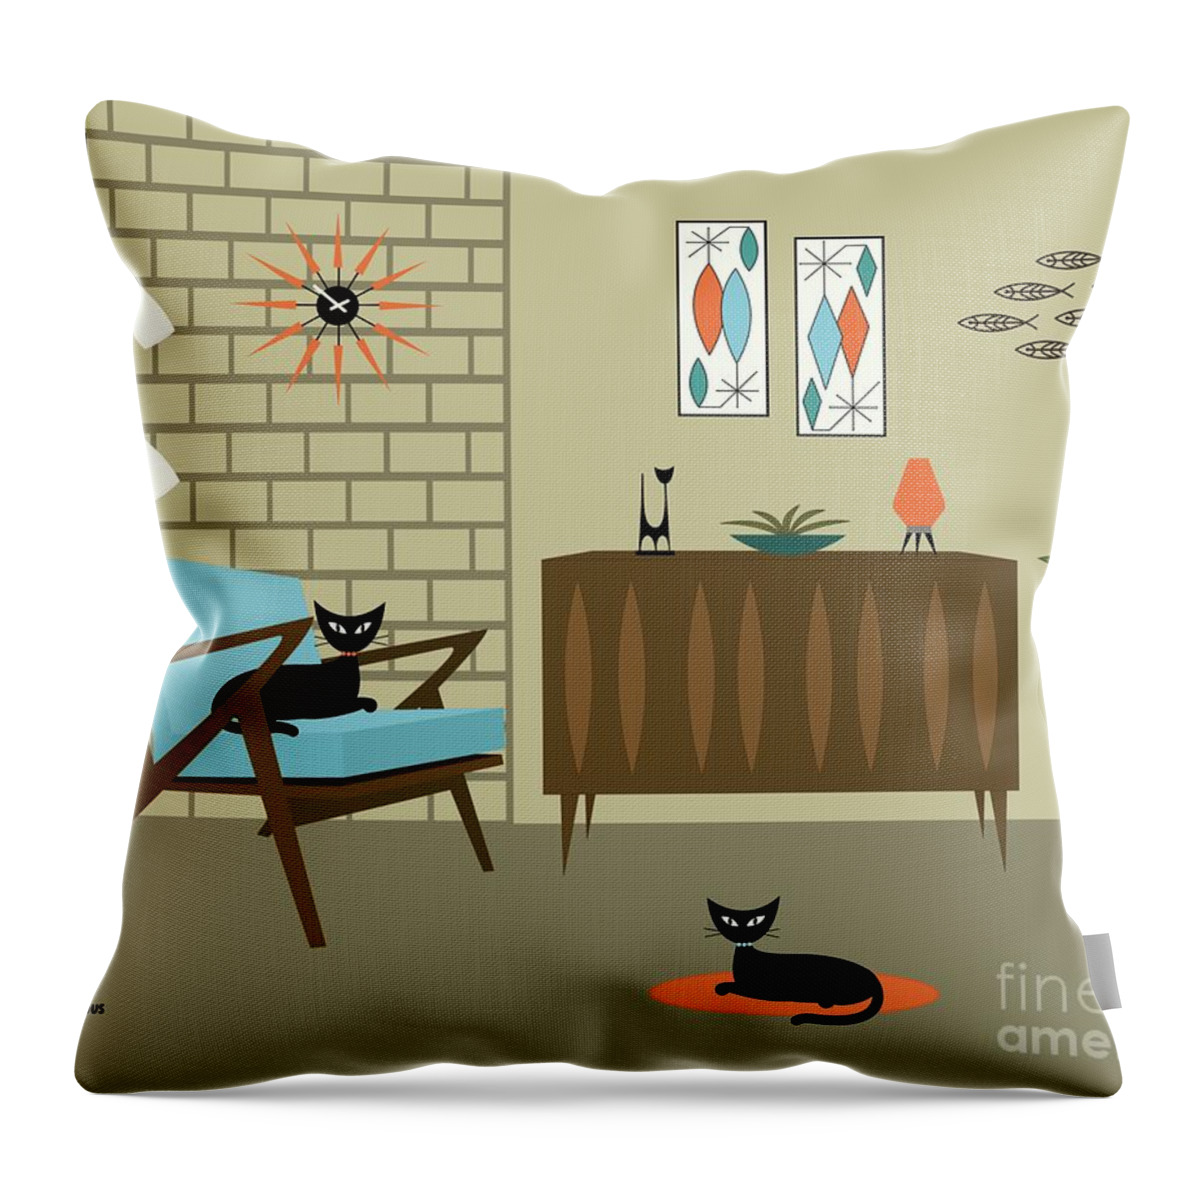 Z Chair Throw Pillow featuring the digital art Mid Century Blue Z Chair Room by Donna Mibus